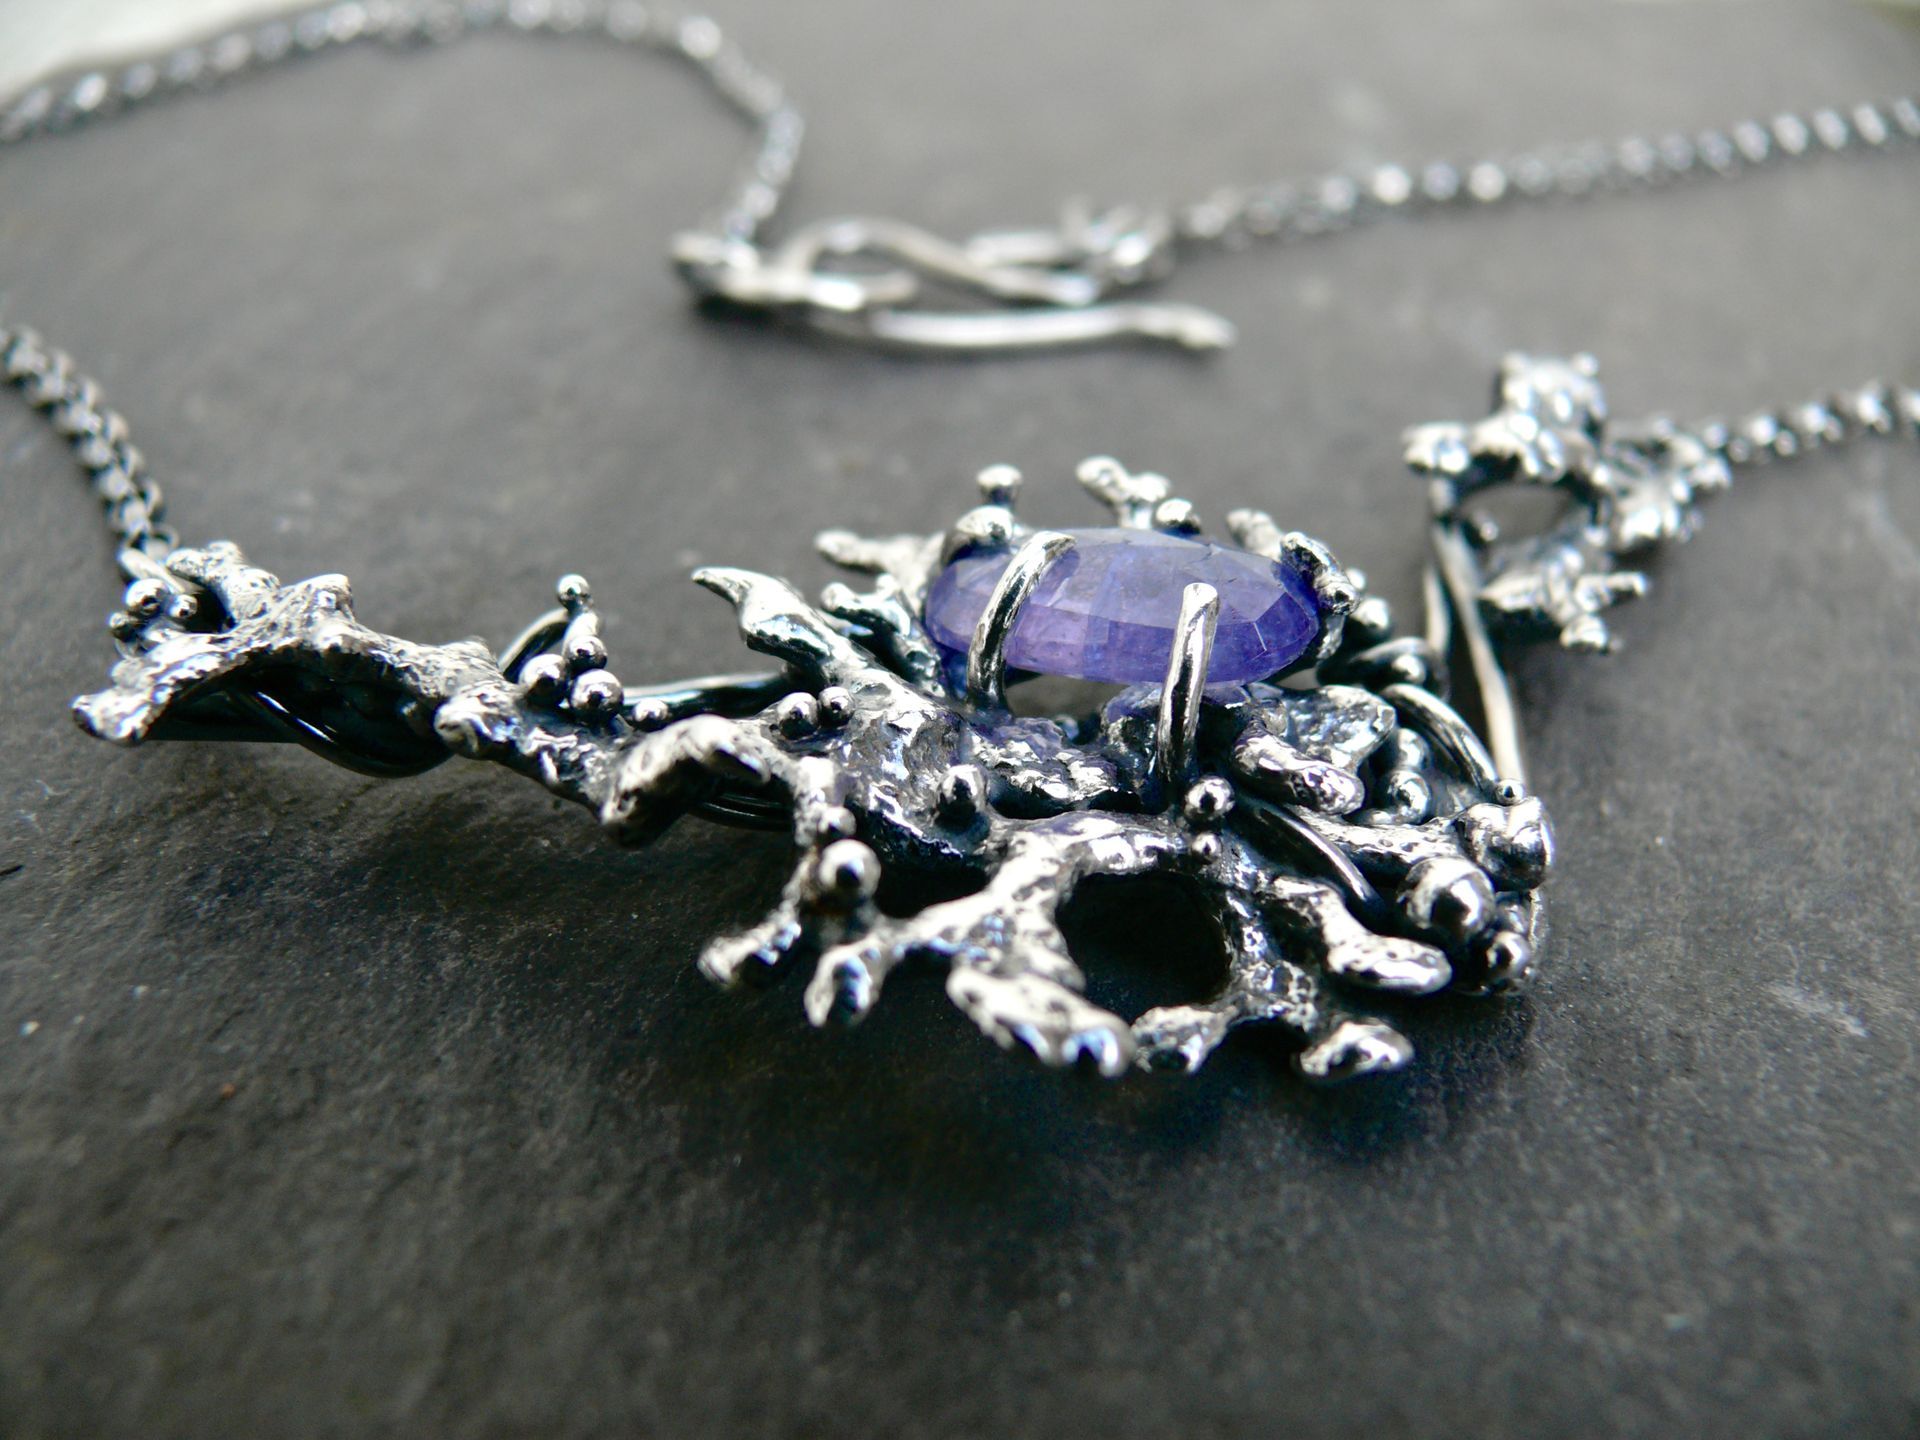 Necklace handmade in scotland with ethical tanzanite and purple gemstone. Features coral design, handcast from coral found on a scottish beach